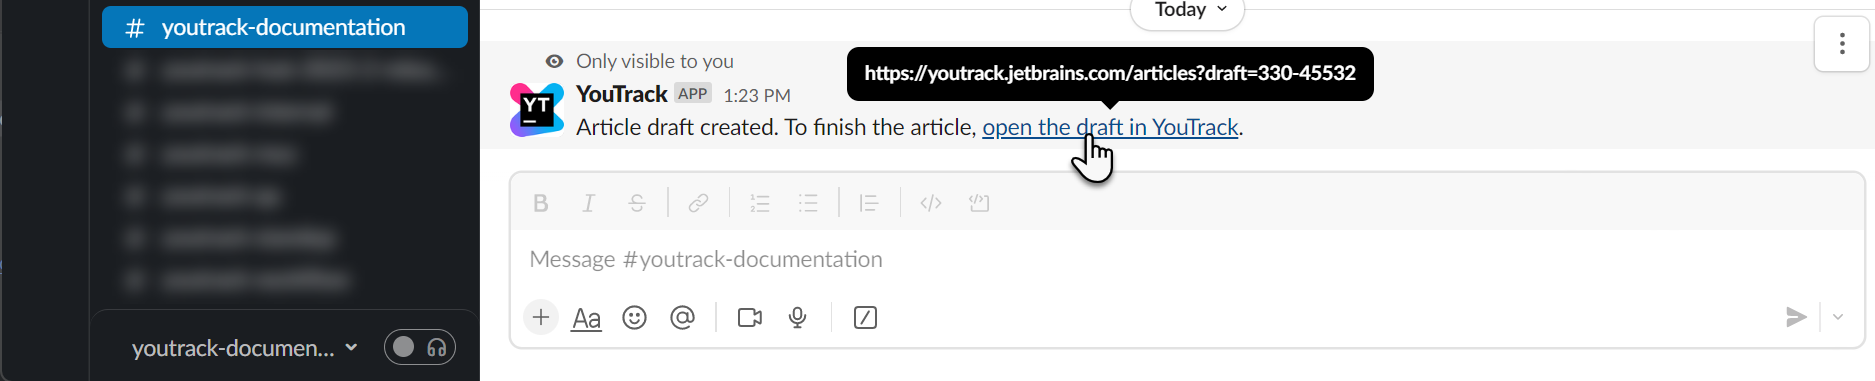 Youtrack app issue draft created